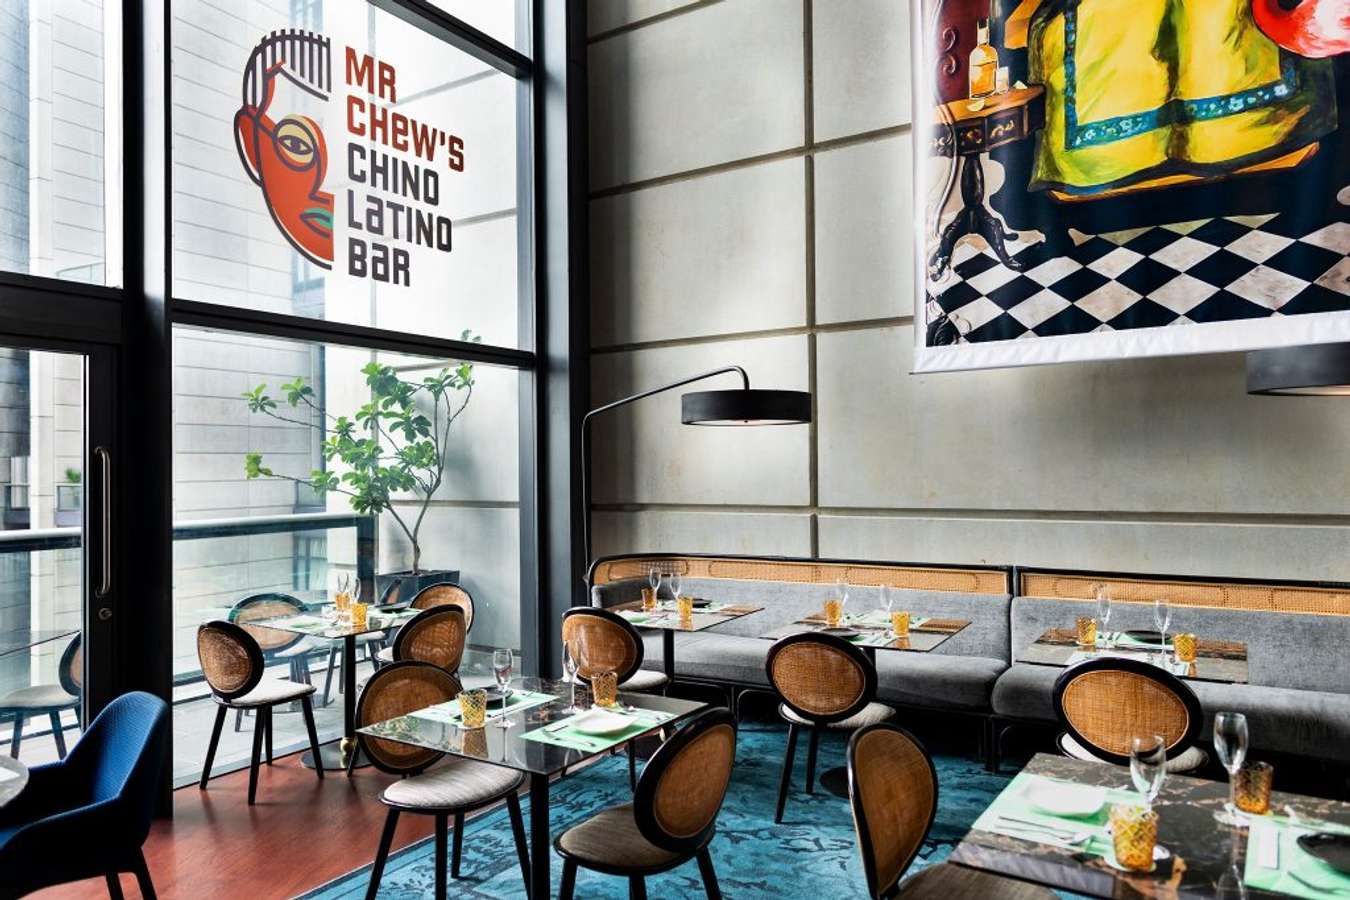 Mr Chew's Chino Latino Bar  - Instagrammable Cafe in KL